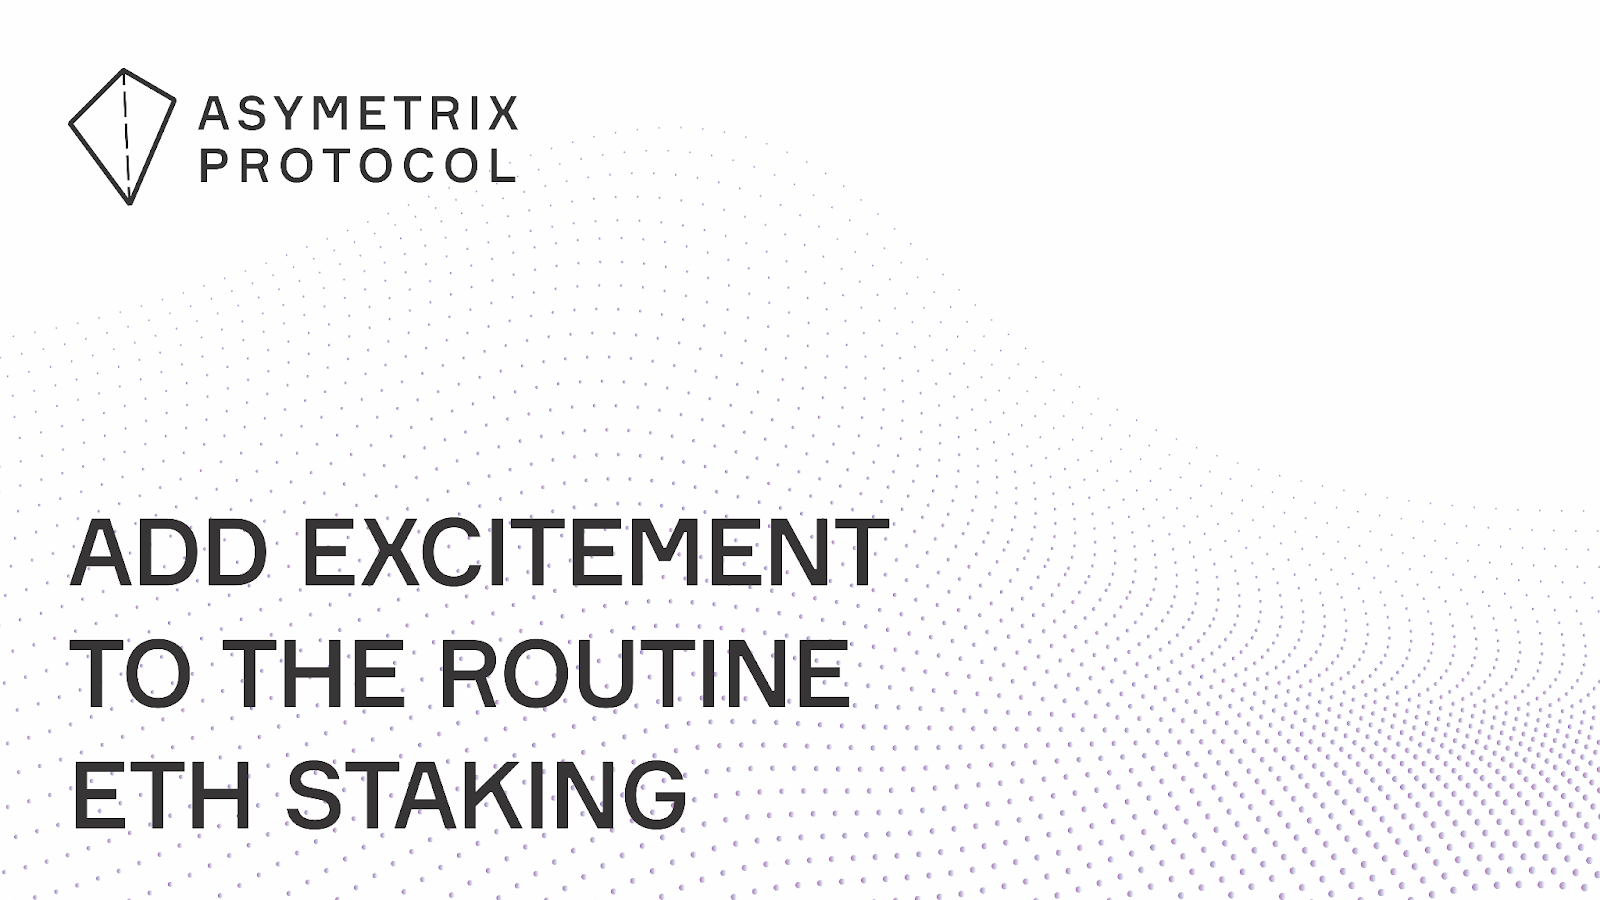 Asymmetric Protocol, Add excitement to the routine ETH staking